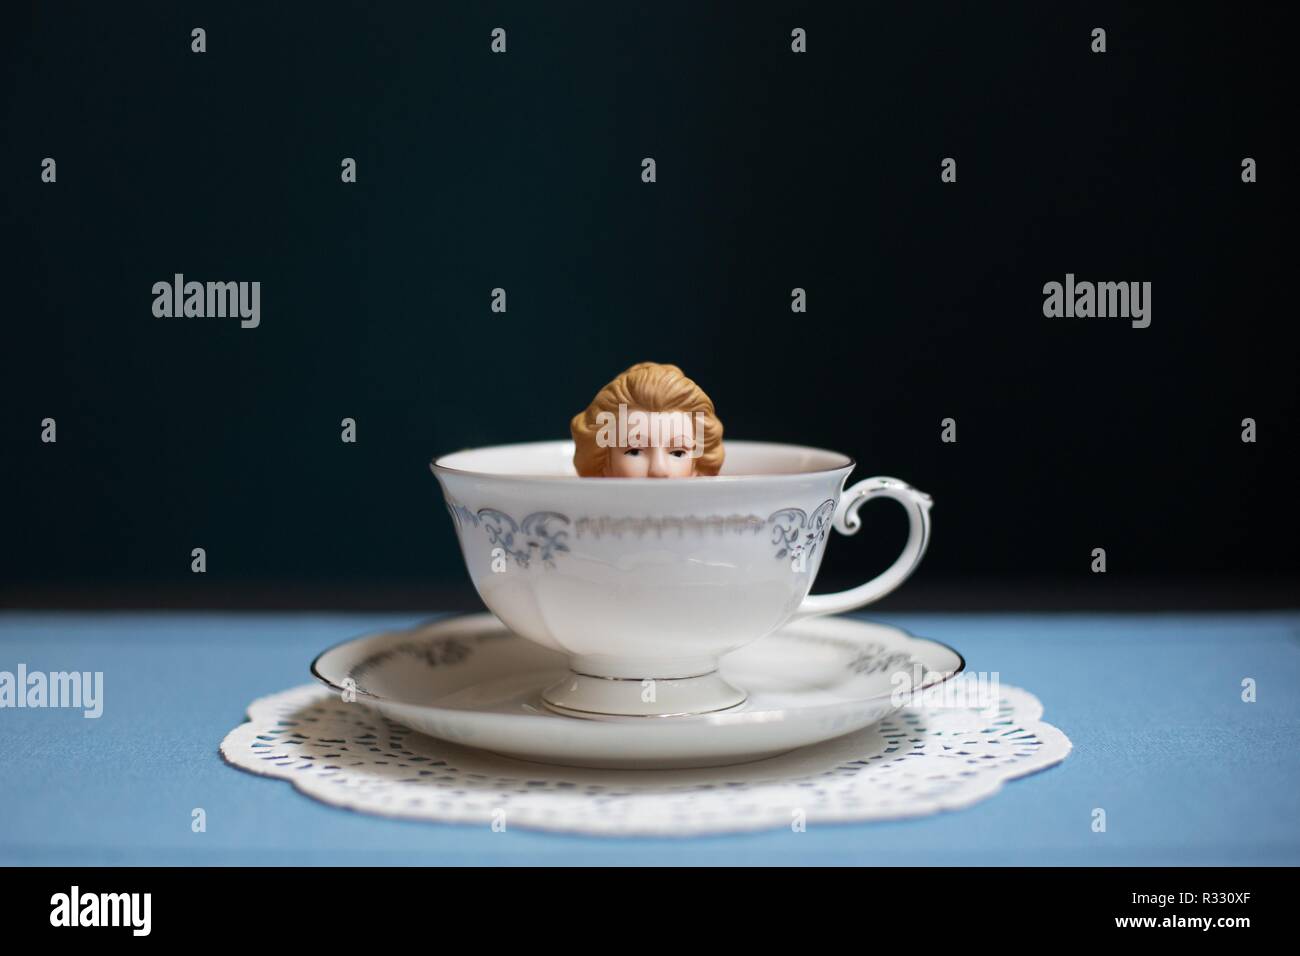 Surreal image of woman (doll) in tea cup. Stock Photo